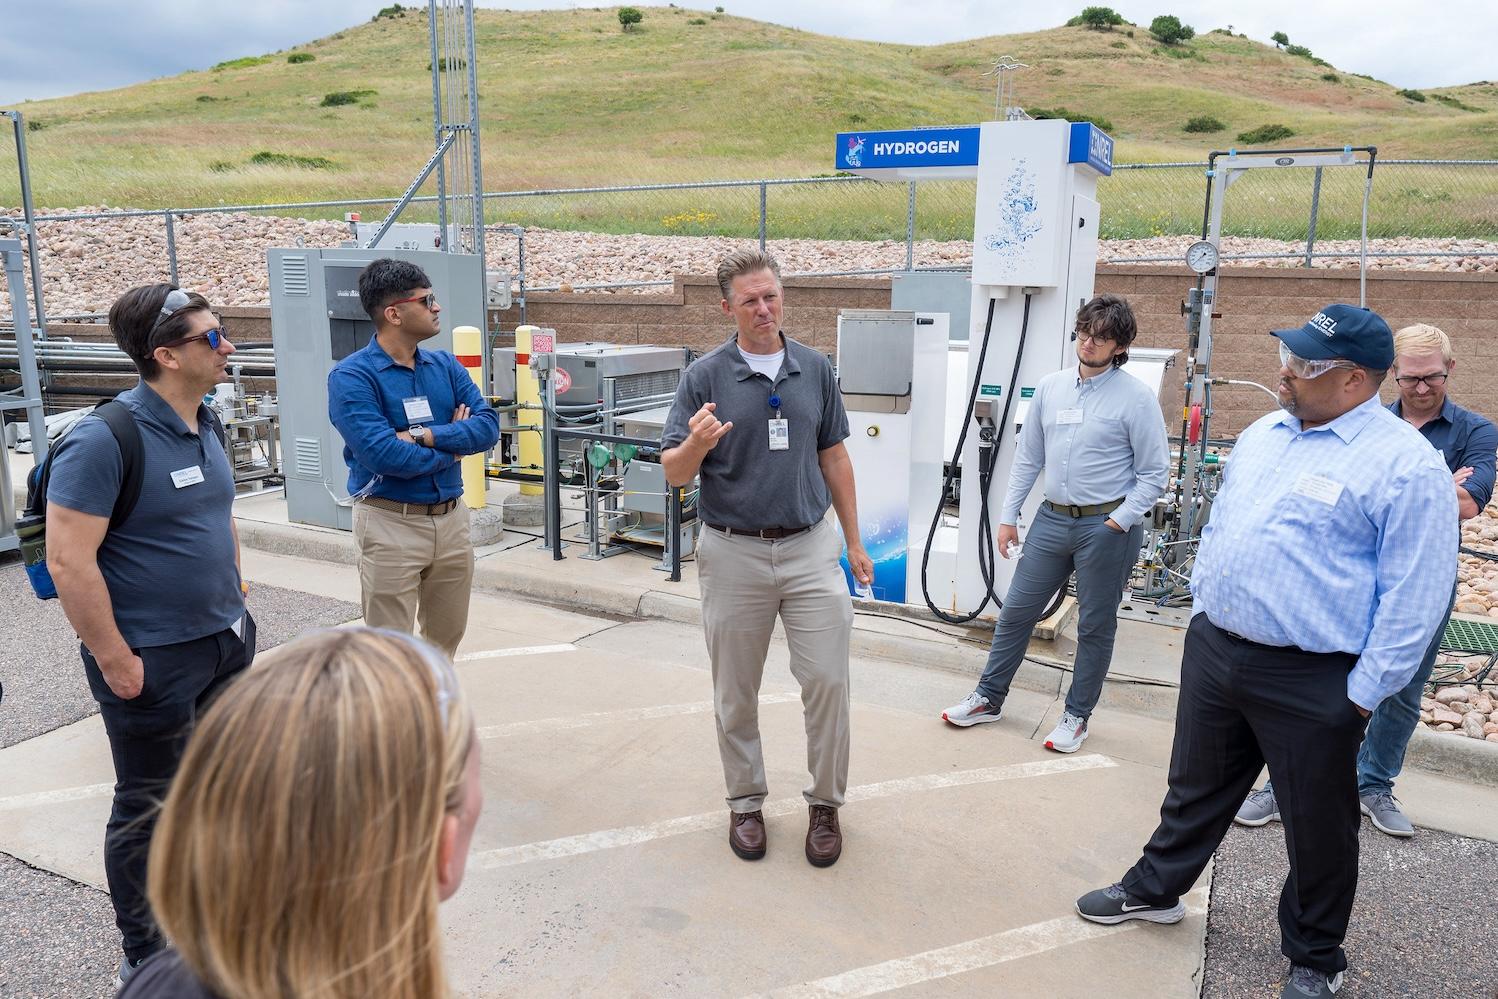 energy executives tour NRL campus to learn more about clean energy